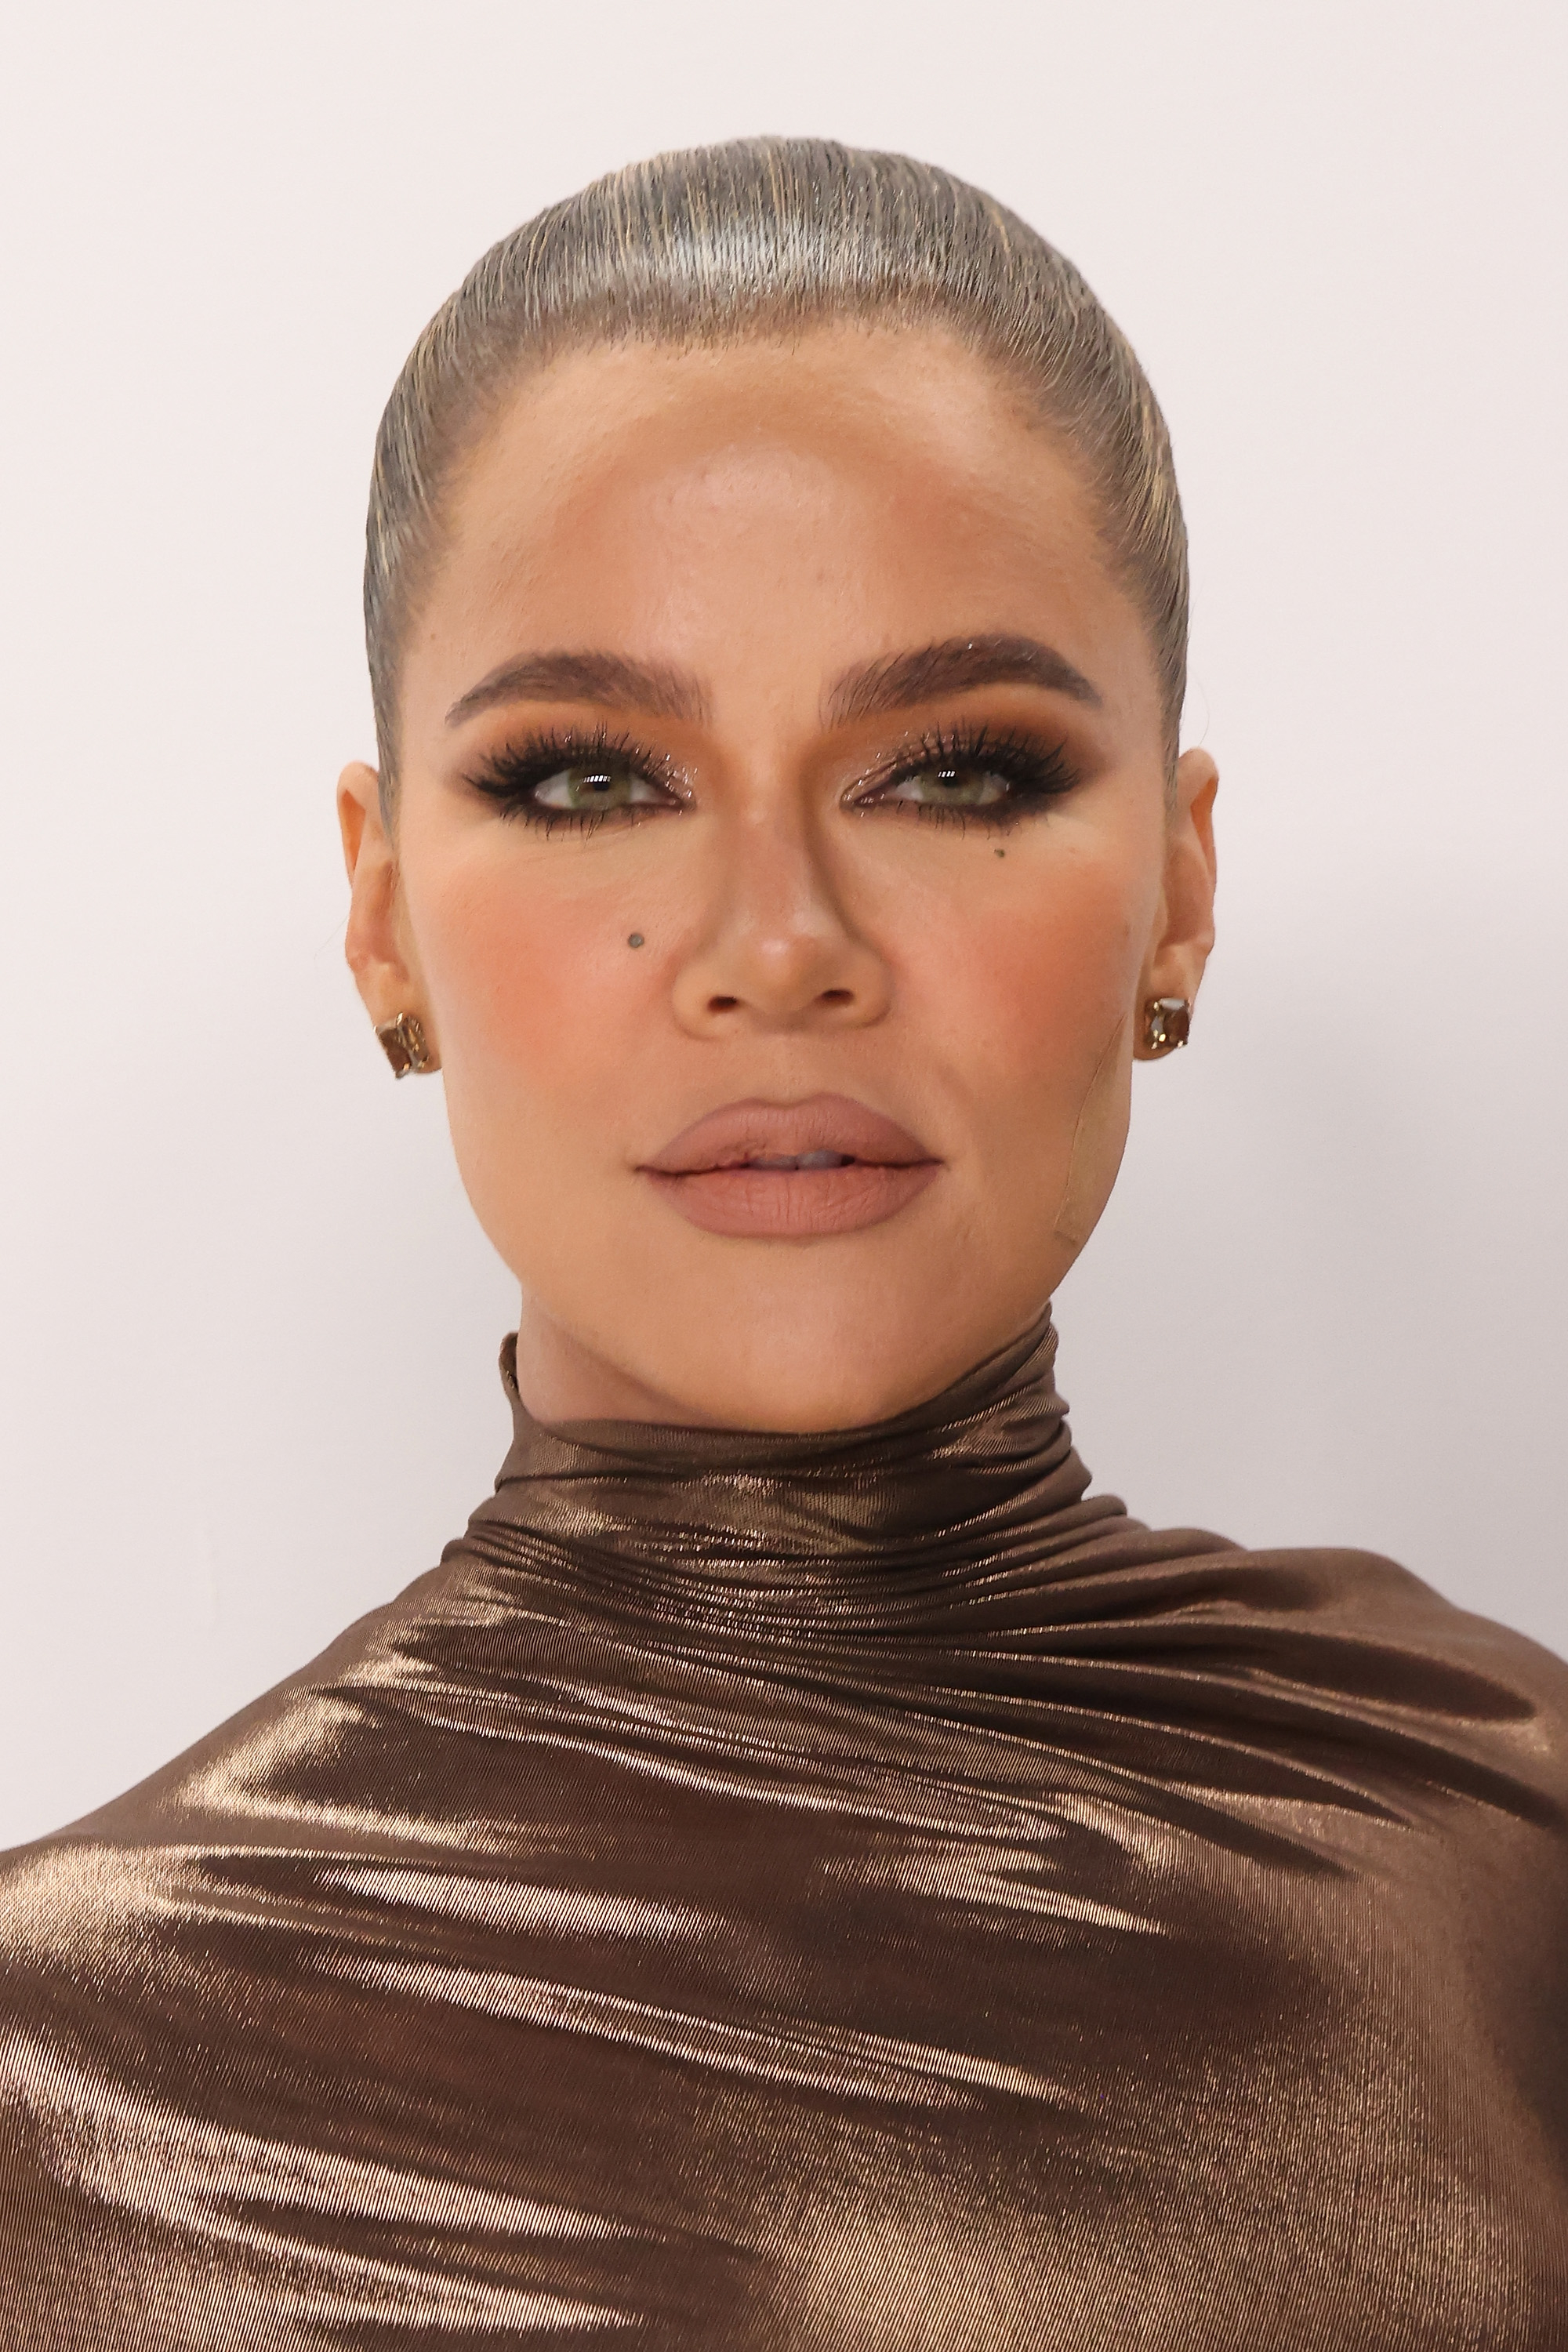 Khloé Kardashian in a metallic, high-neck dress, with her hair slicked back and wearing bold makeup